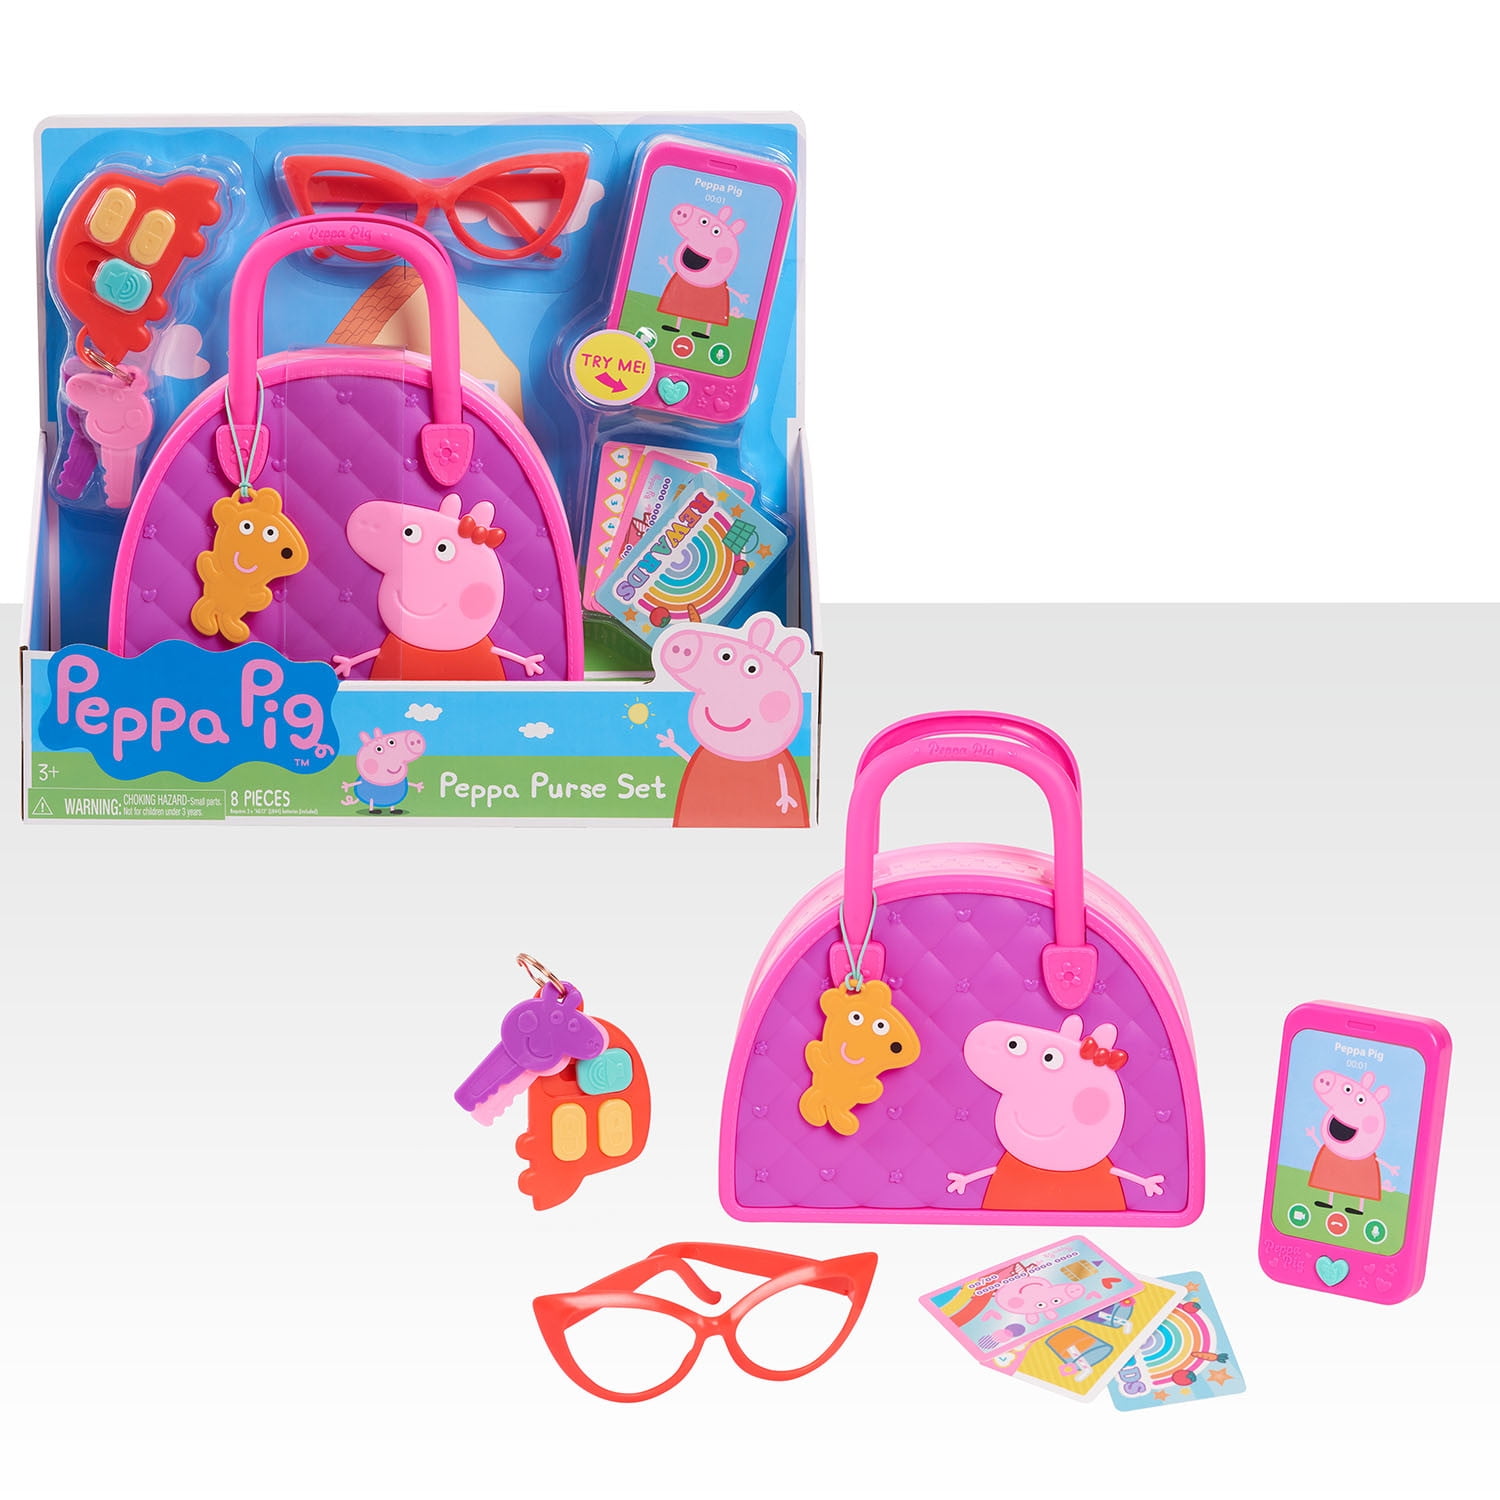 Peppa Pig Bag Set, Dress Up & Pretend Play,  Kids Toys for Ages 3 Up, Gifts and Presents